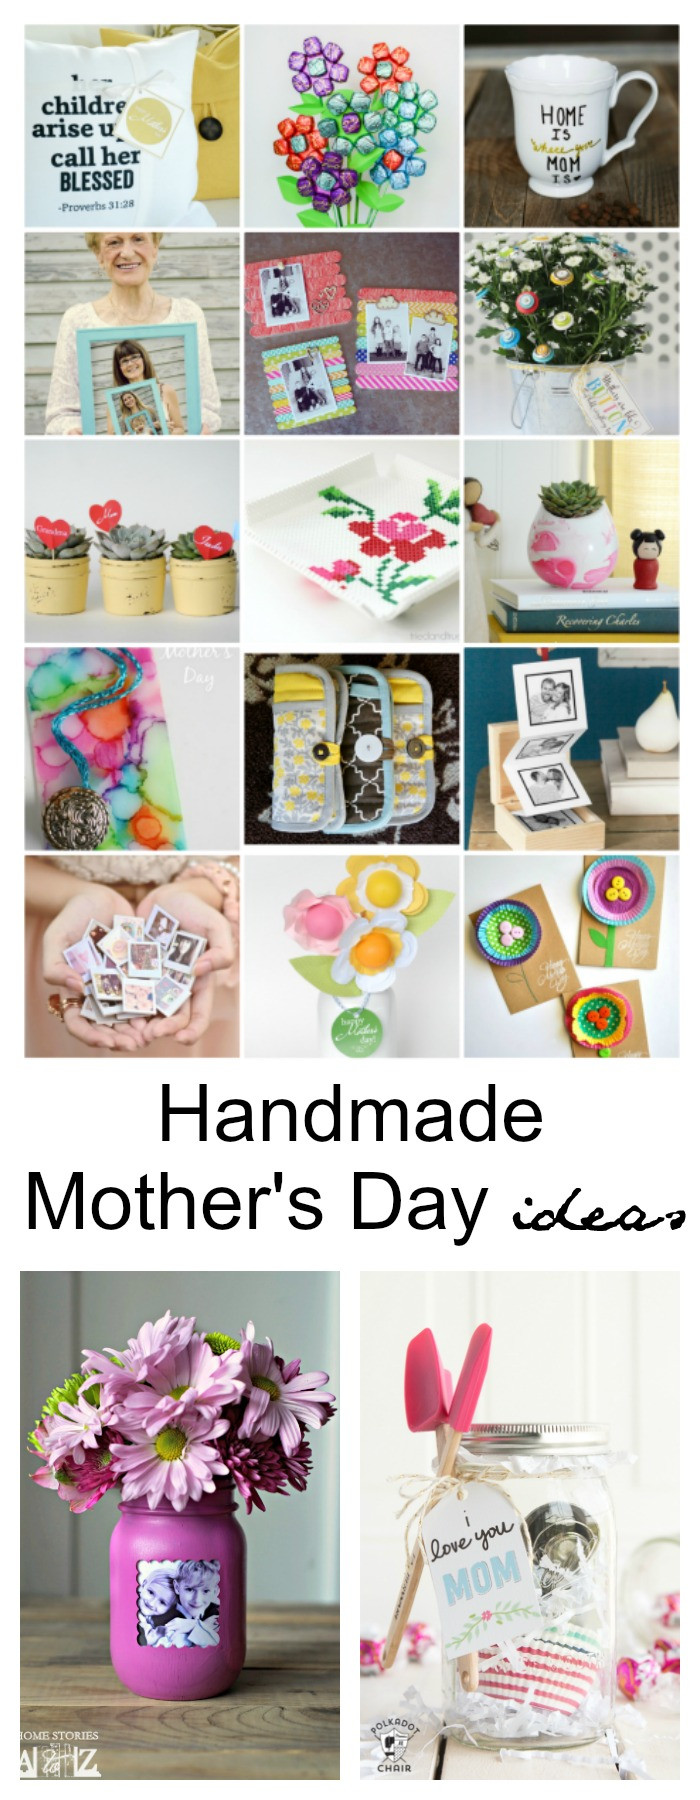 Motherday Gift Ideas
 43 DIY Mothers Day Gifts Handmade Gift Ideas For Mom